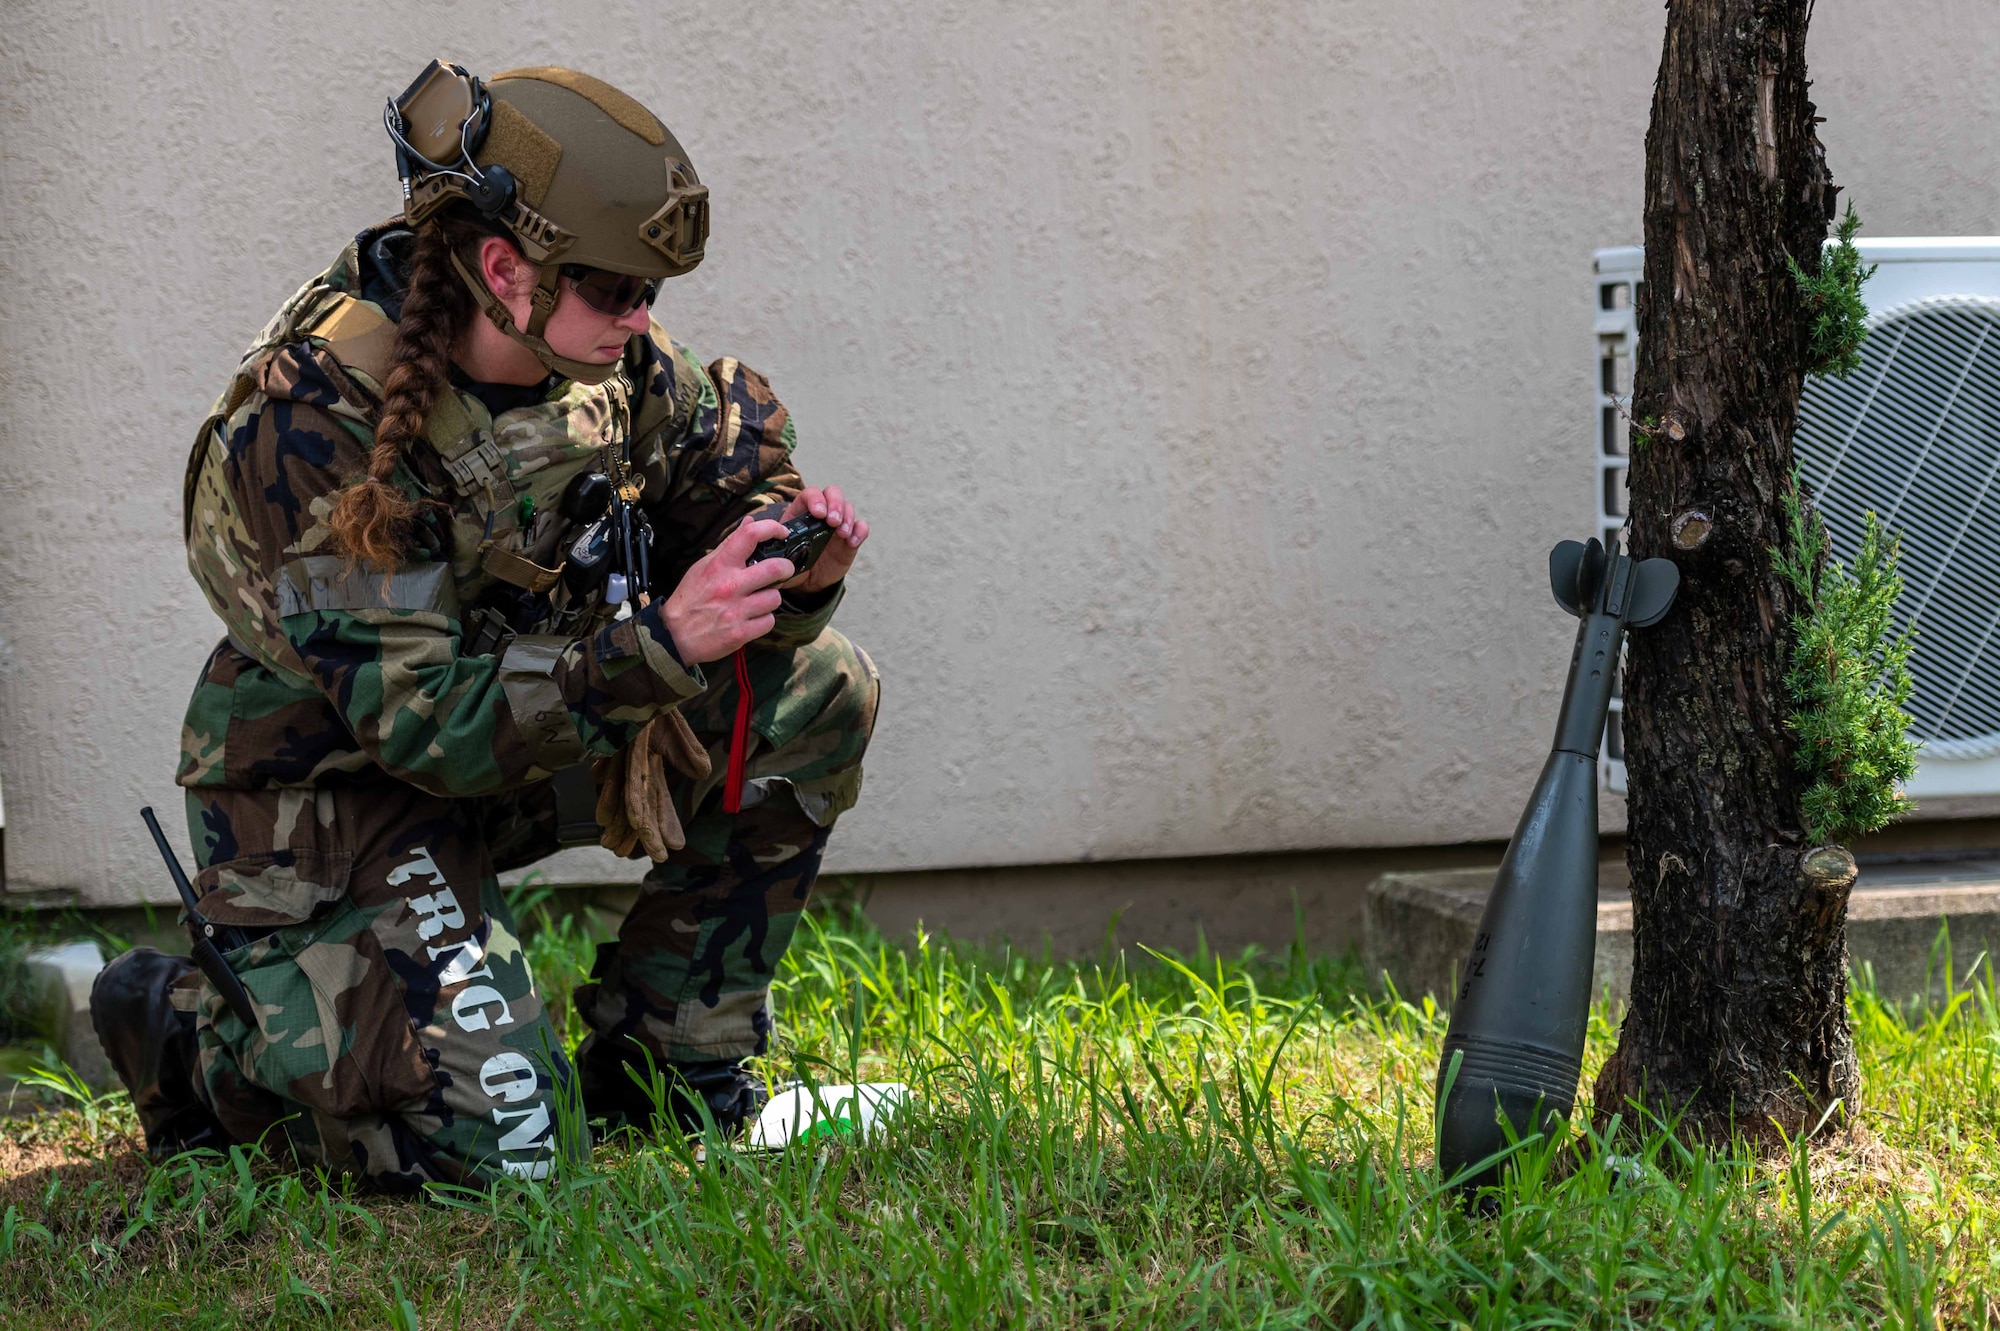 Senior Airman Janie Roberts, 51st Civil Engineer Squadron explosive ordnance disposal (EOD) team lead, takes photos and annotates the description of a simulated unexploded ordnance (UXO) during a base-wide training event at Osan Air Base